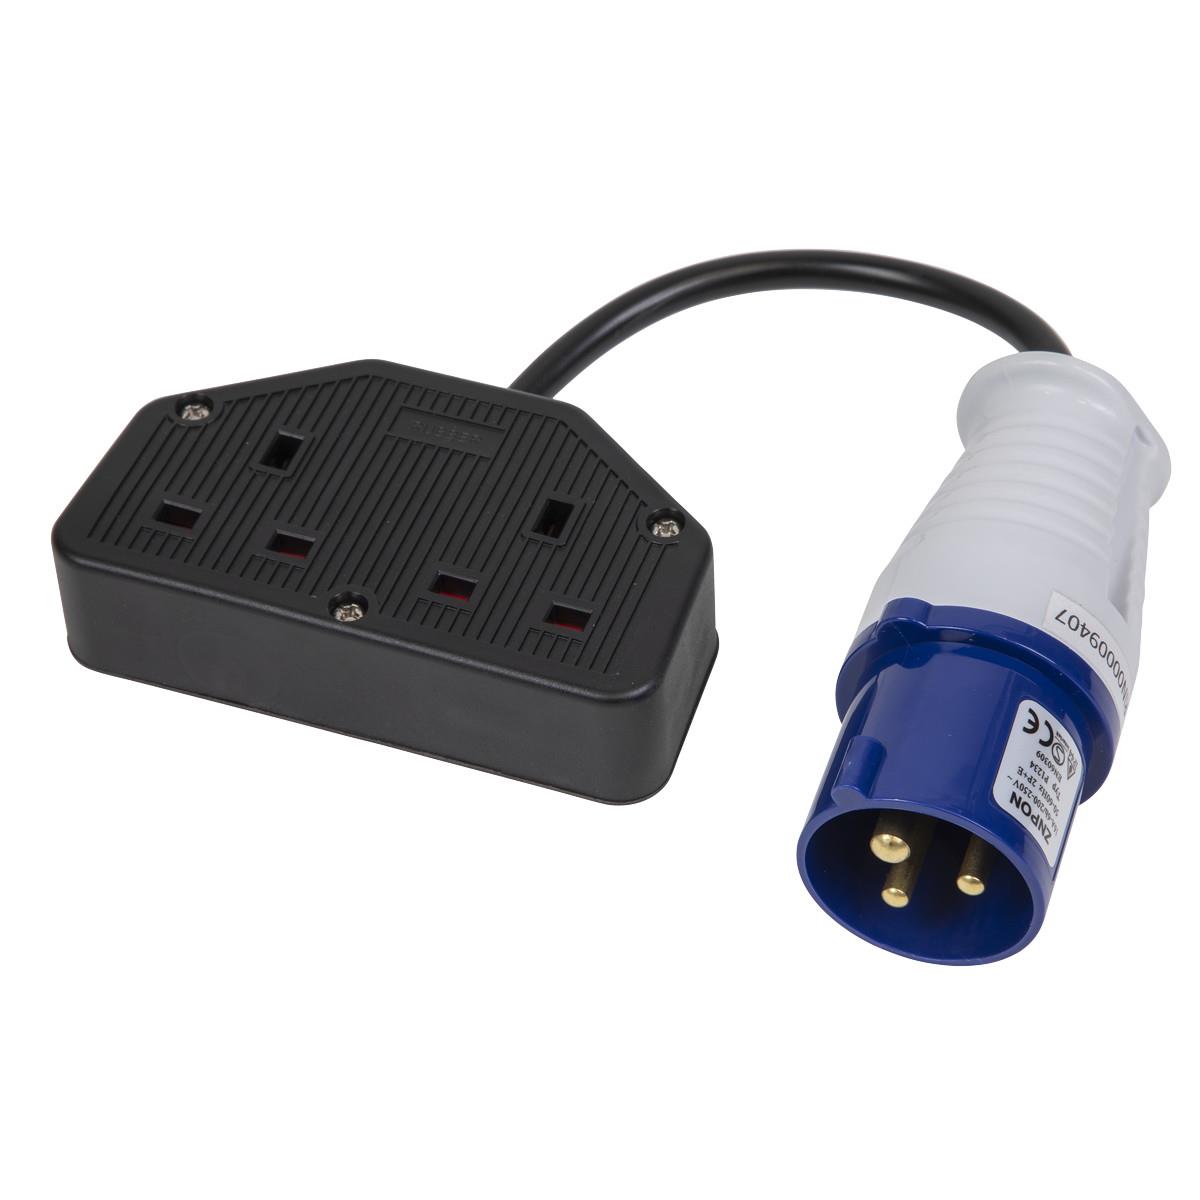 Sealey WPS16132 Trailing Lead; 16Amp Plug to Double 3 Pin 13 Amp Socket; 350mm Long Cable